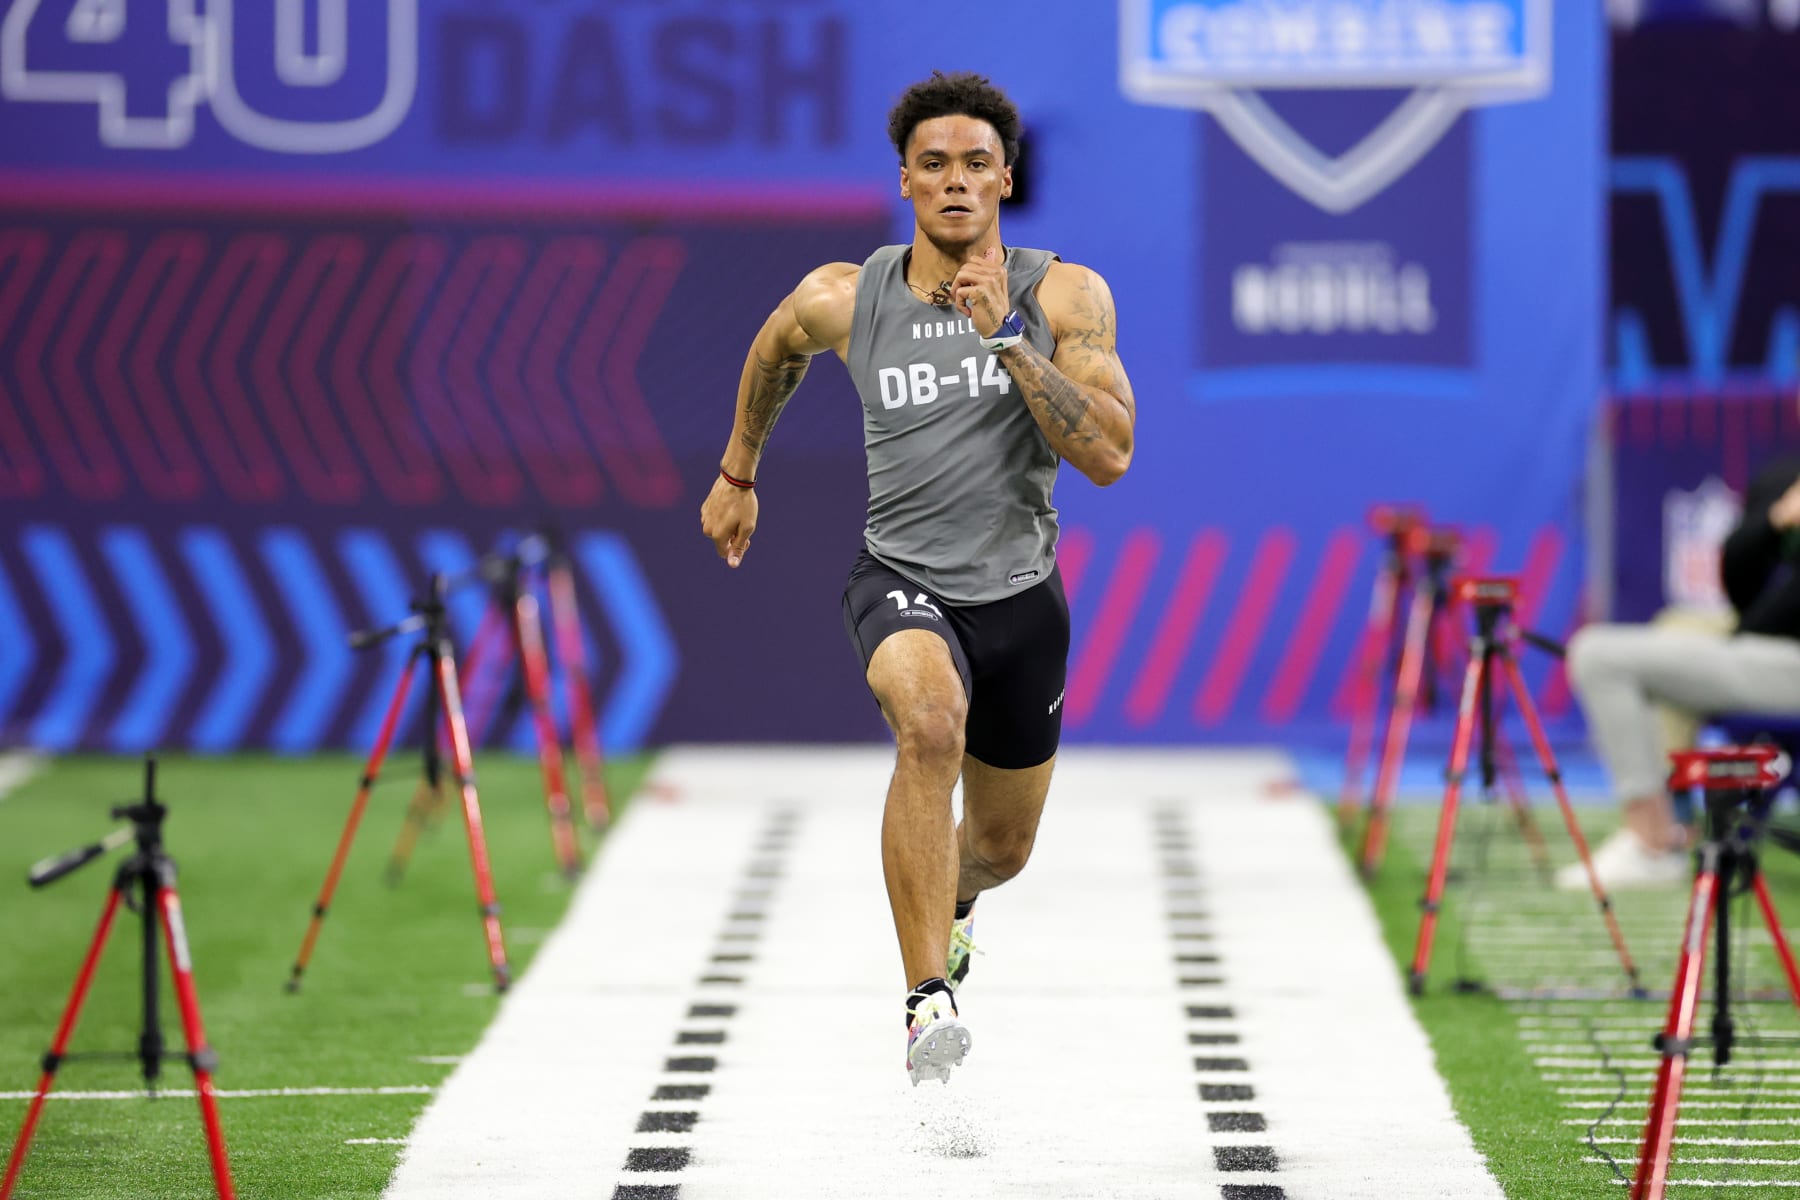 2023 NFL Combine Takeaways: Six Observations About the Draft Class